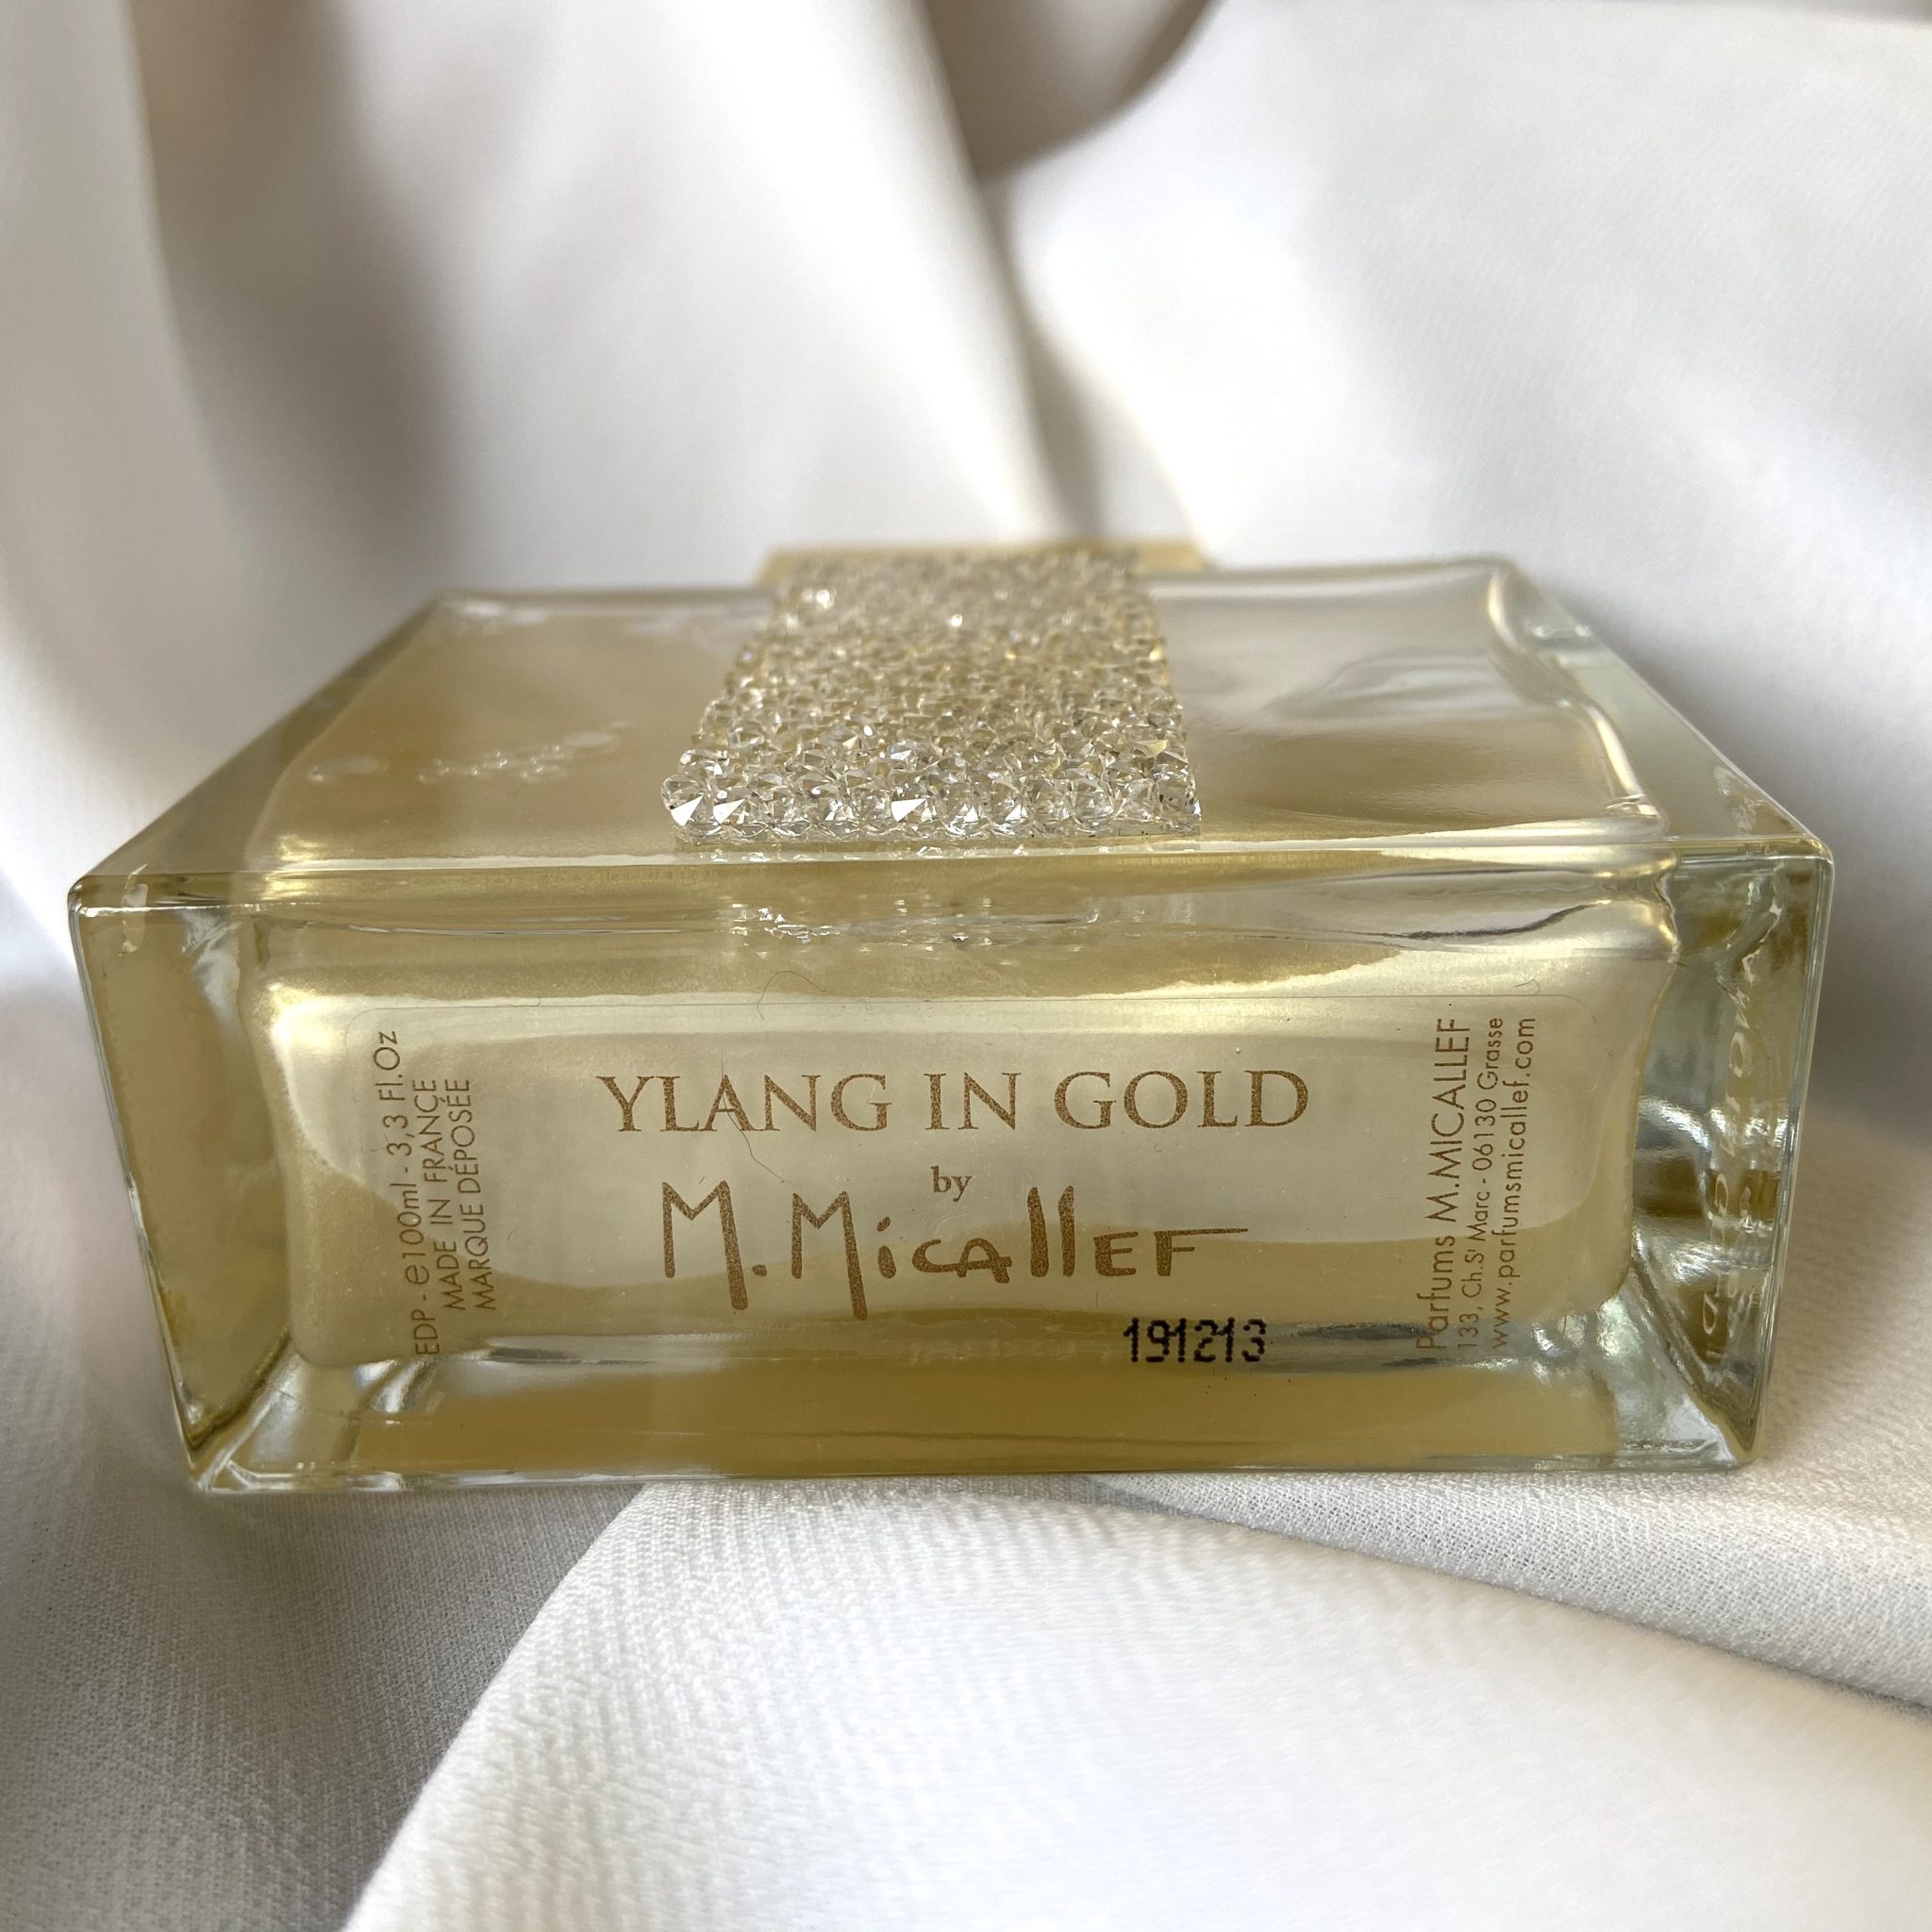 ylang in gold travel size